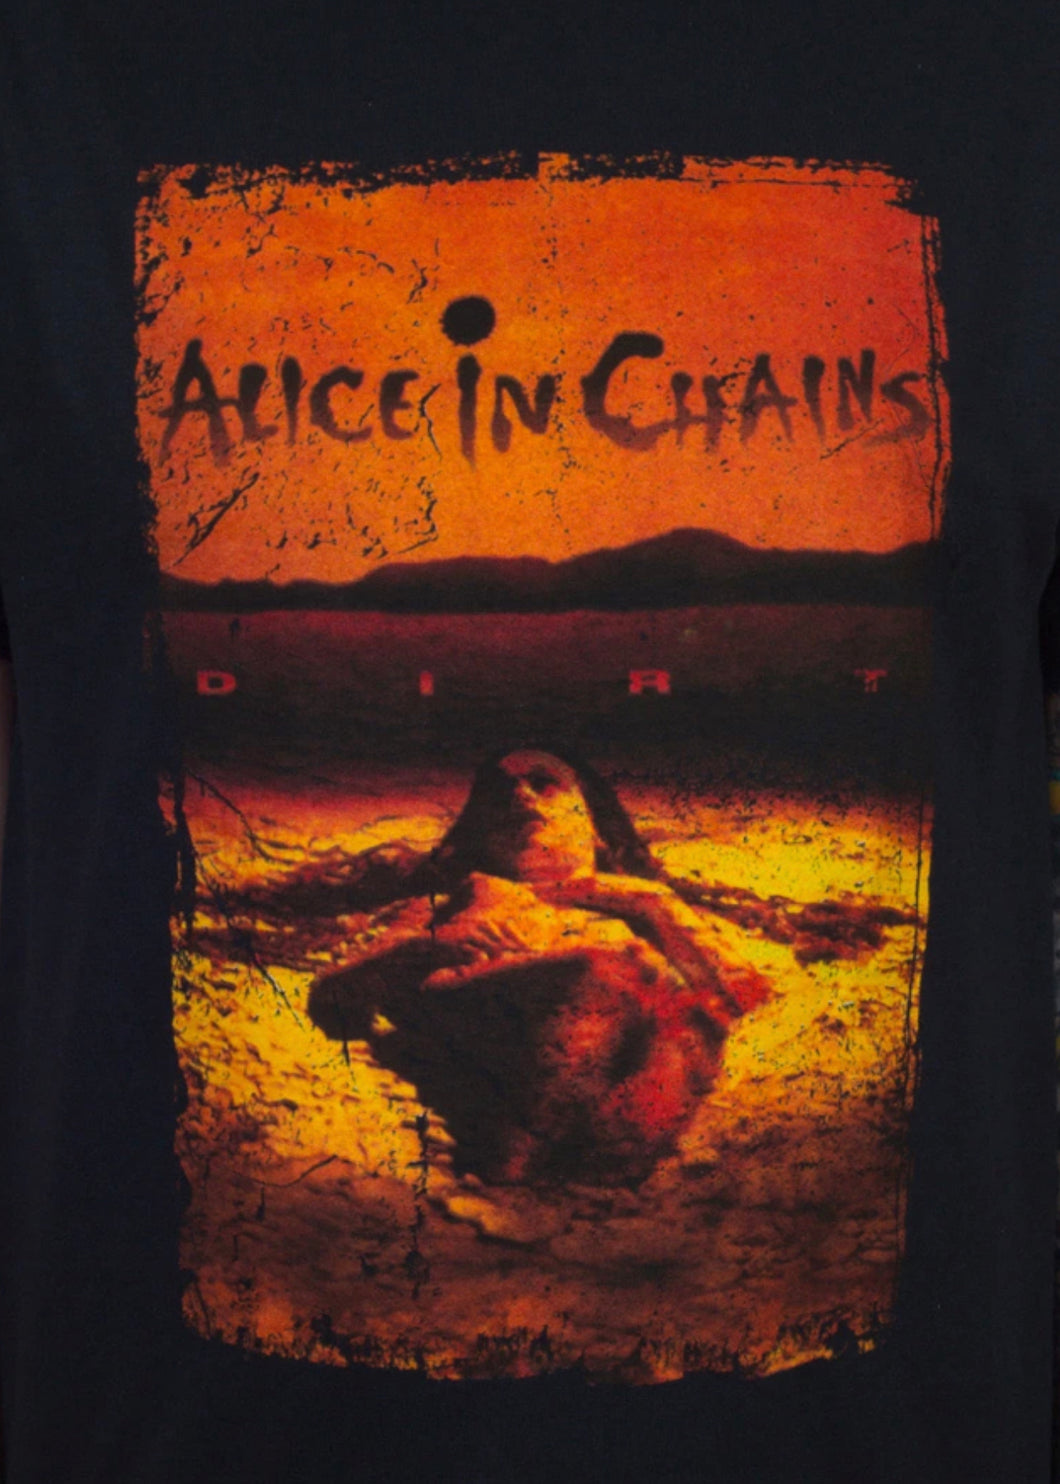 Alice In Chains - Dirt... SHORT SLEEVE SHIRT (PLEASE EMAIL/CONTACT REGARDING SIZE AVAILABILITY)